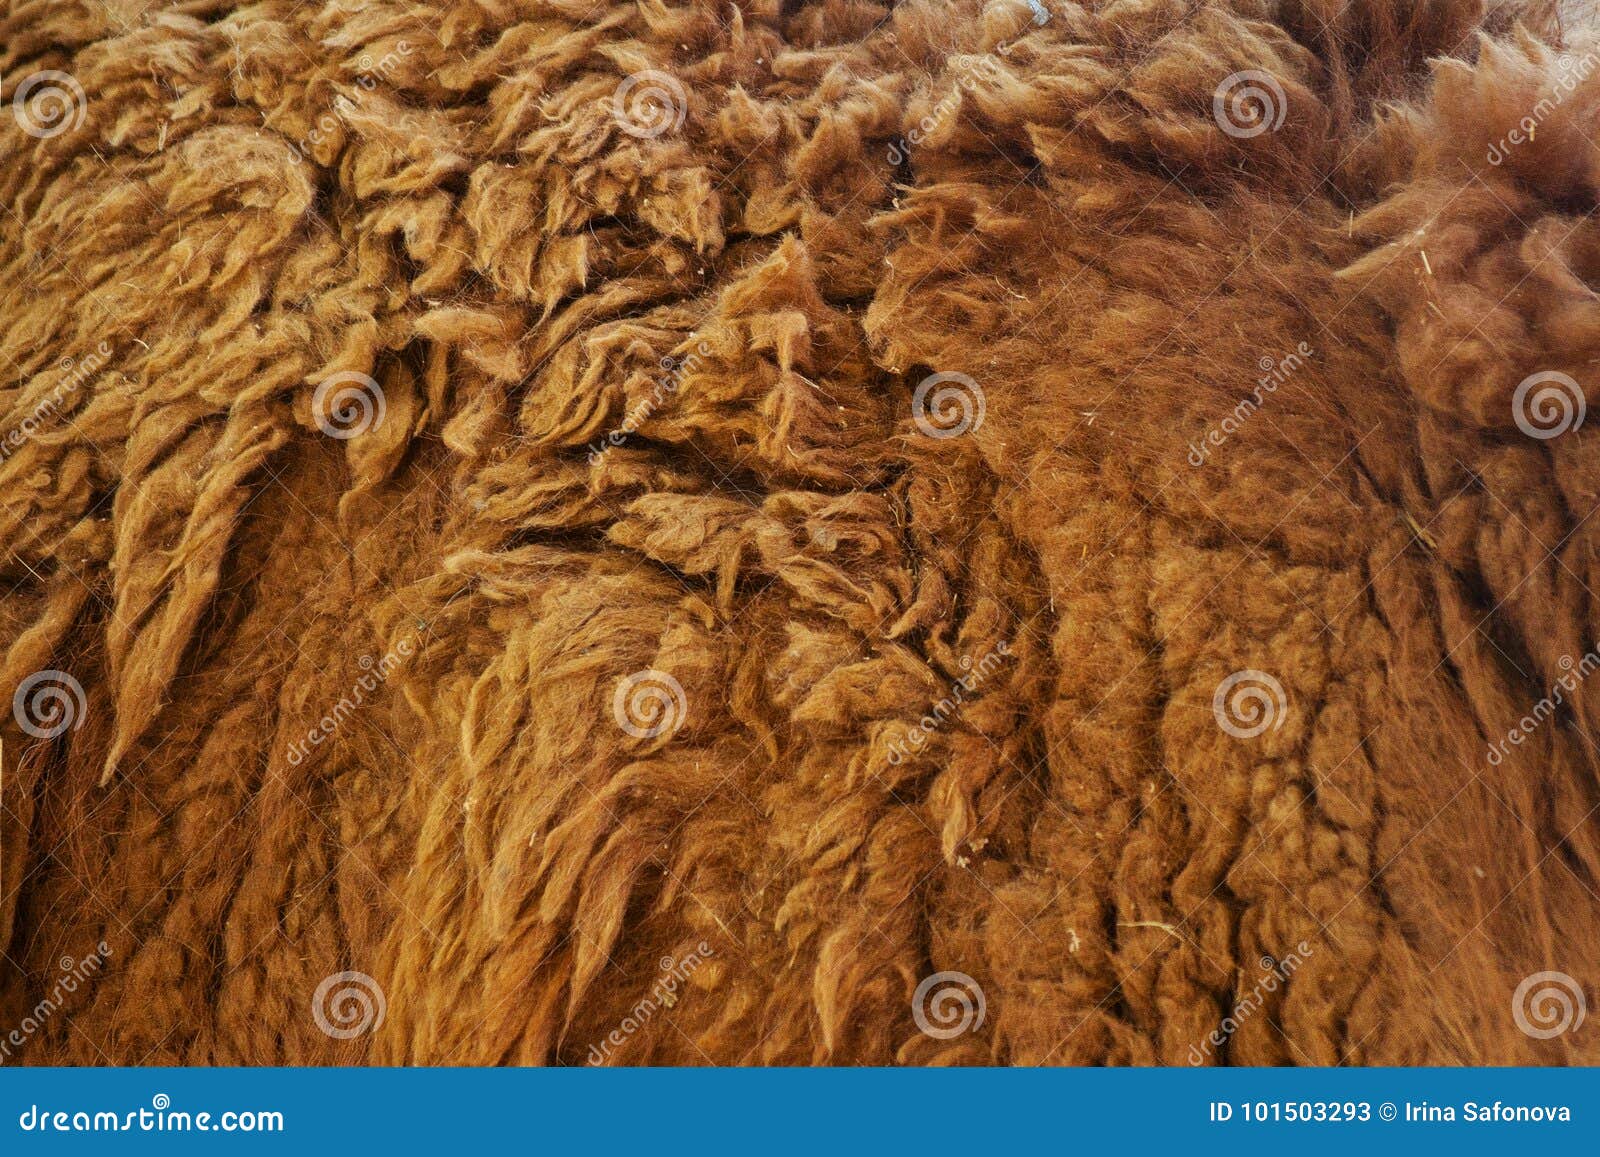 melodie Scully Dwingend Texture of a Wool Animal Lama Stock Image - Image of glama, clothing:  101503293